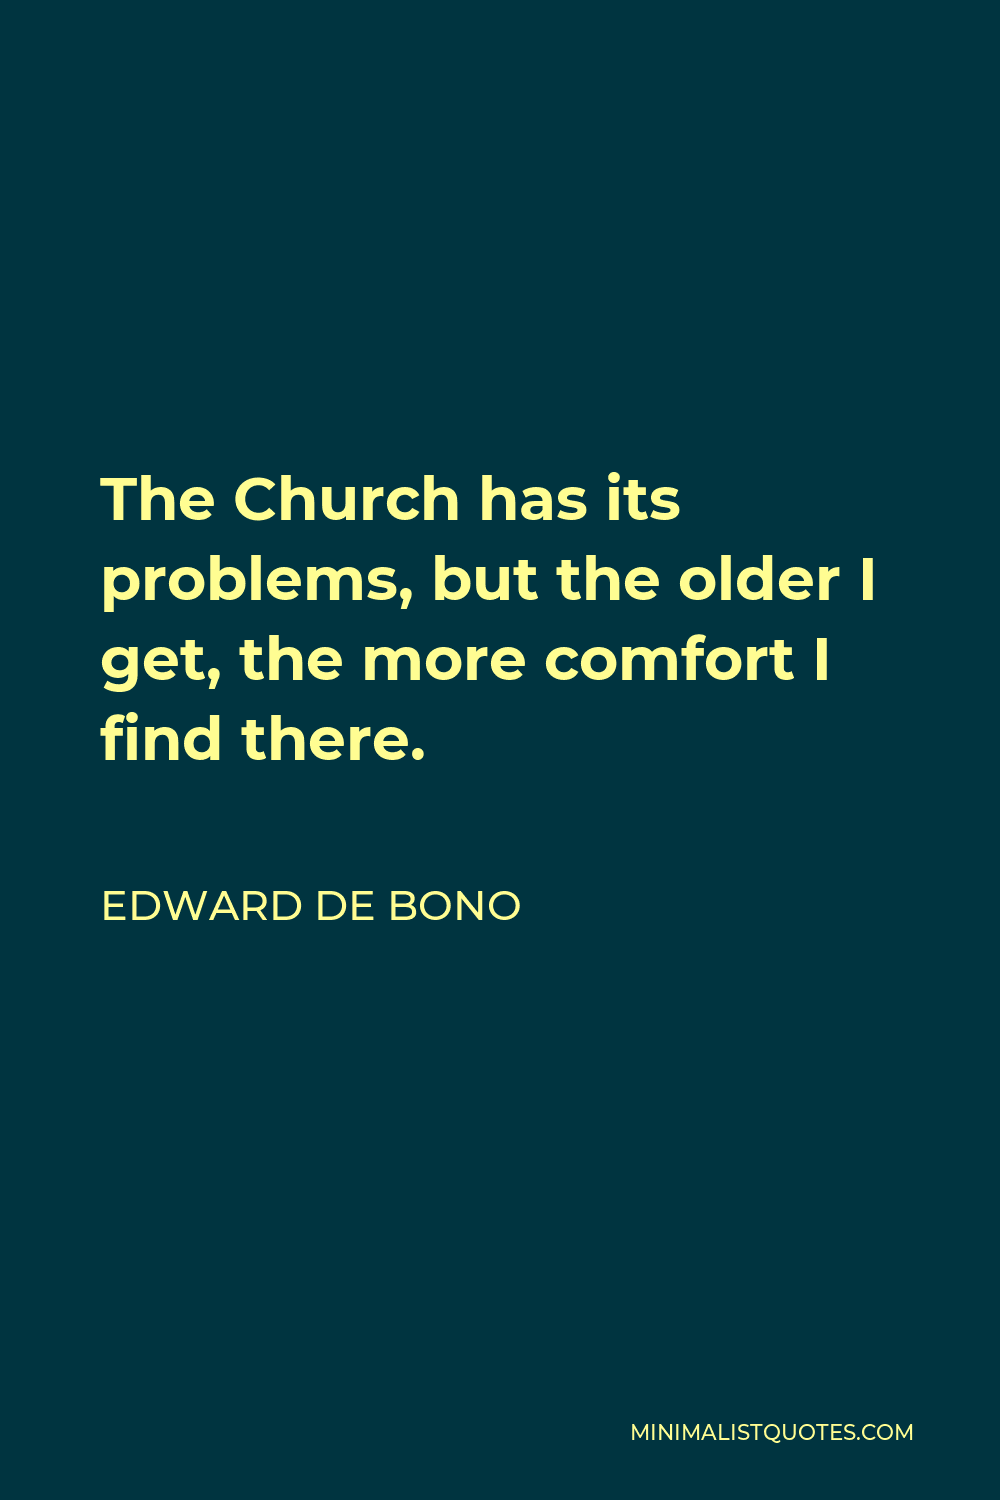 Edward de Bono Quote - The Church has its problems, but the older I get, the more comfort I find there.